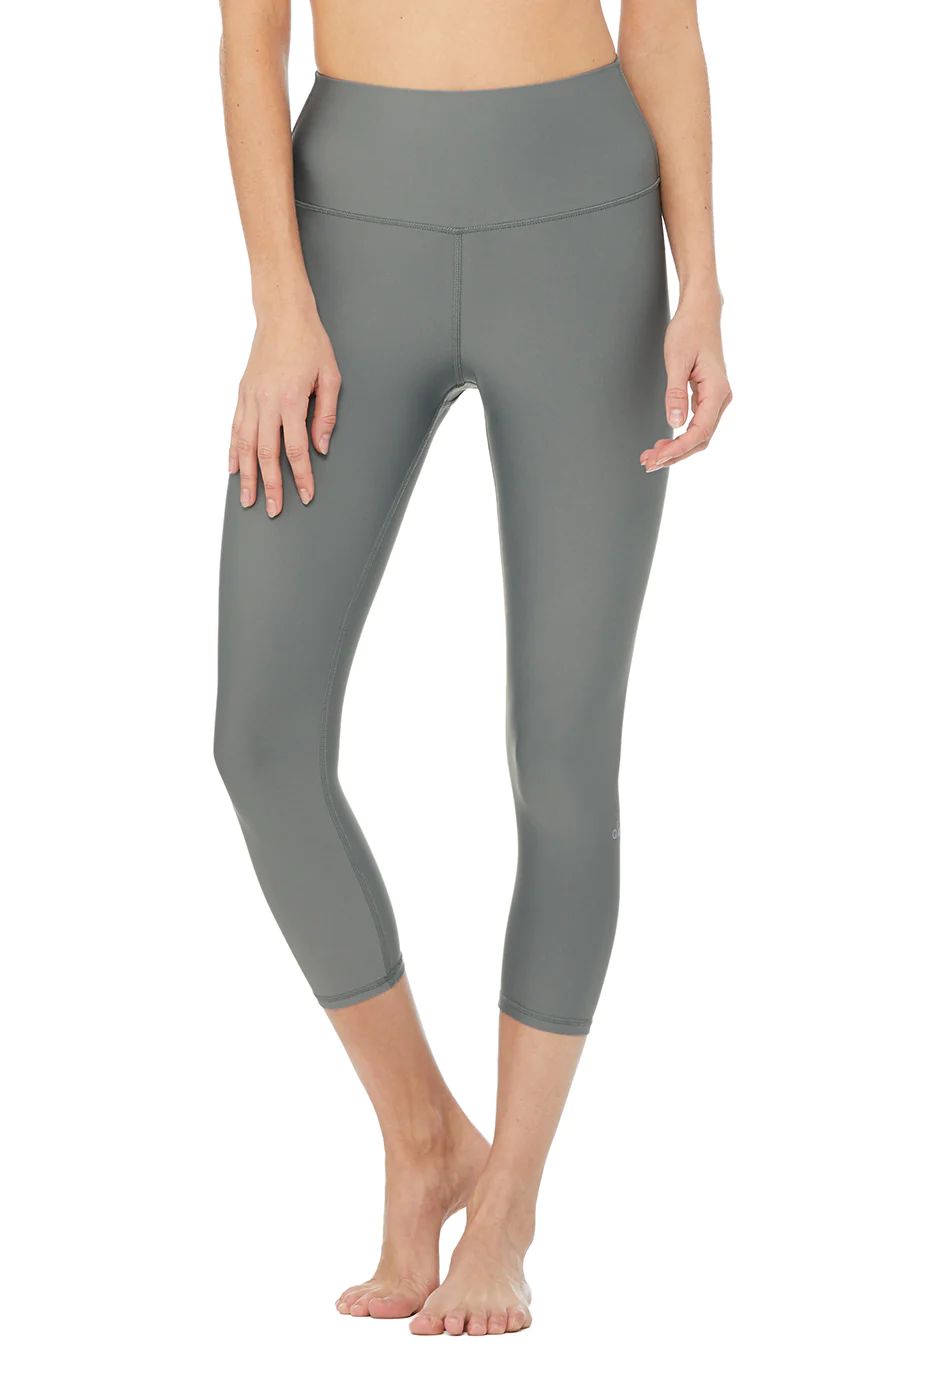 Alo YogaÂ® Women's High-Waist Airlift Capri - Concrete - Size - M - Moto bottoms weight seamless-solid | Alo Yoga